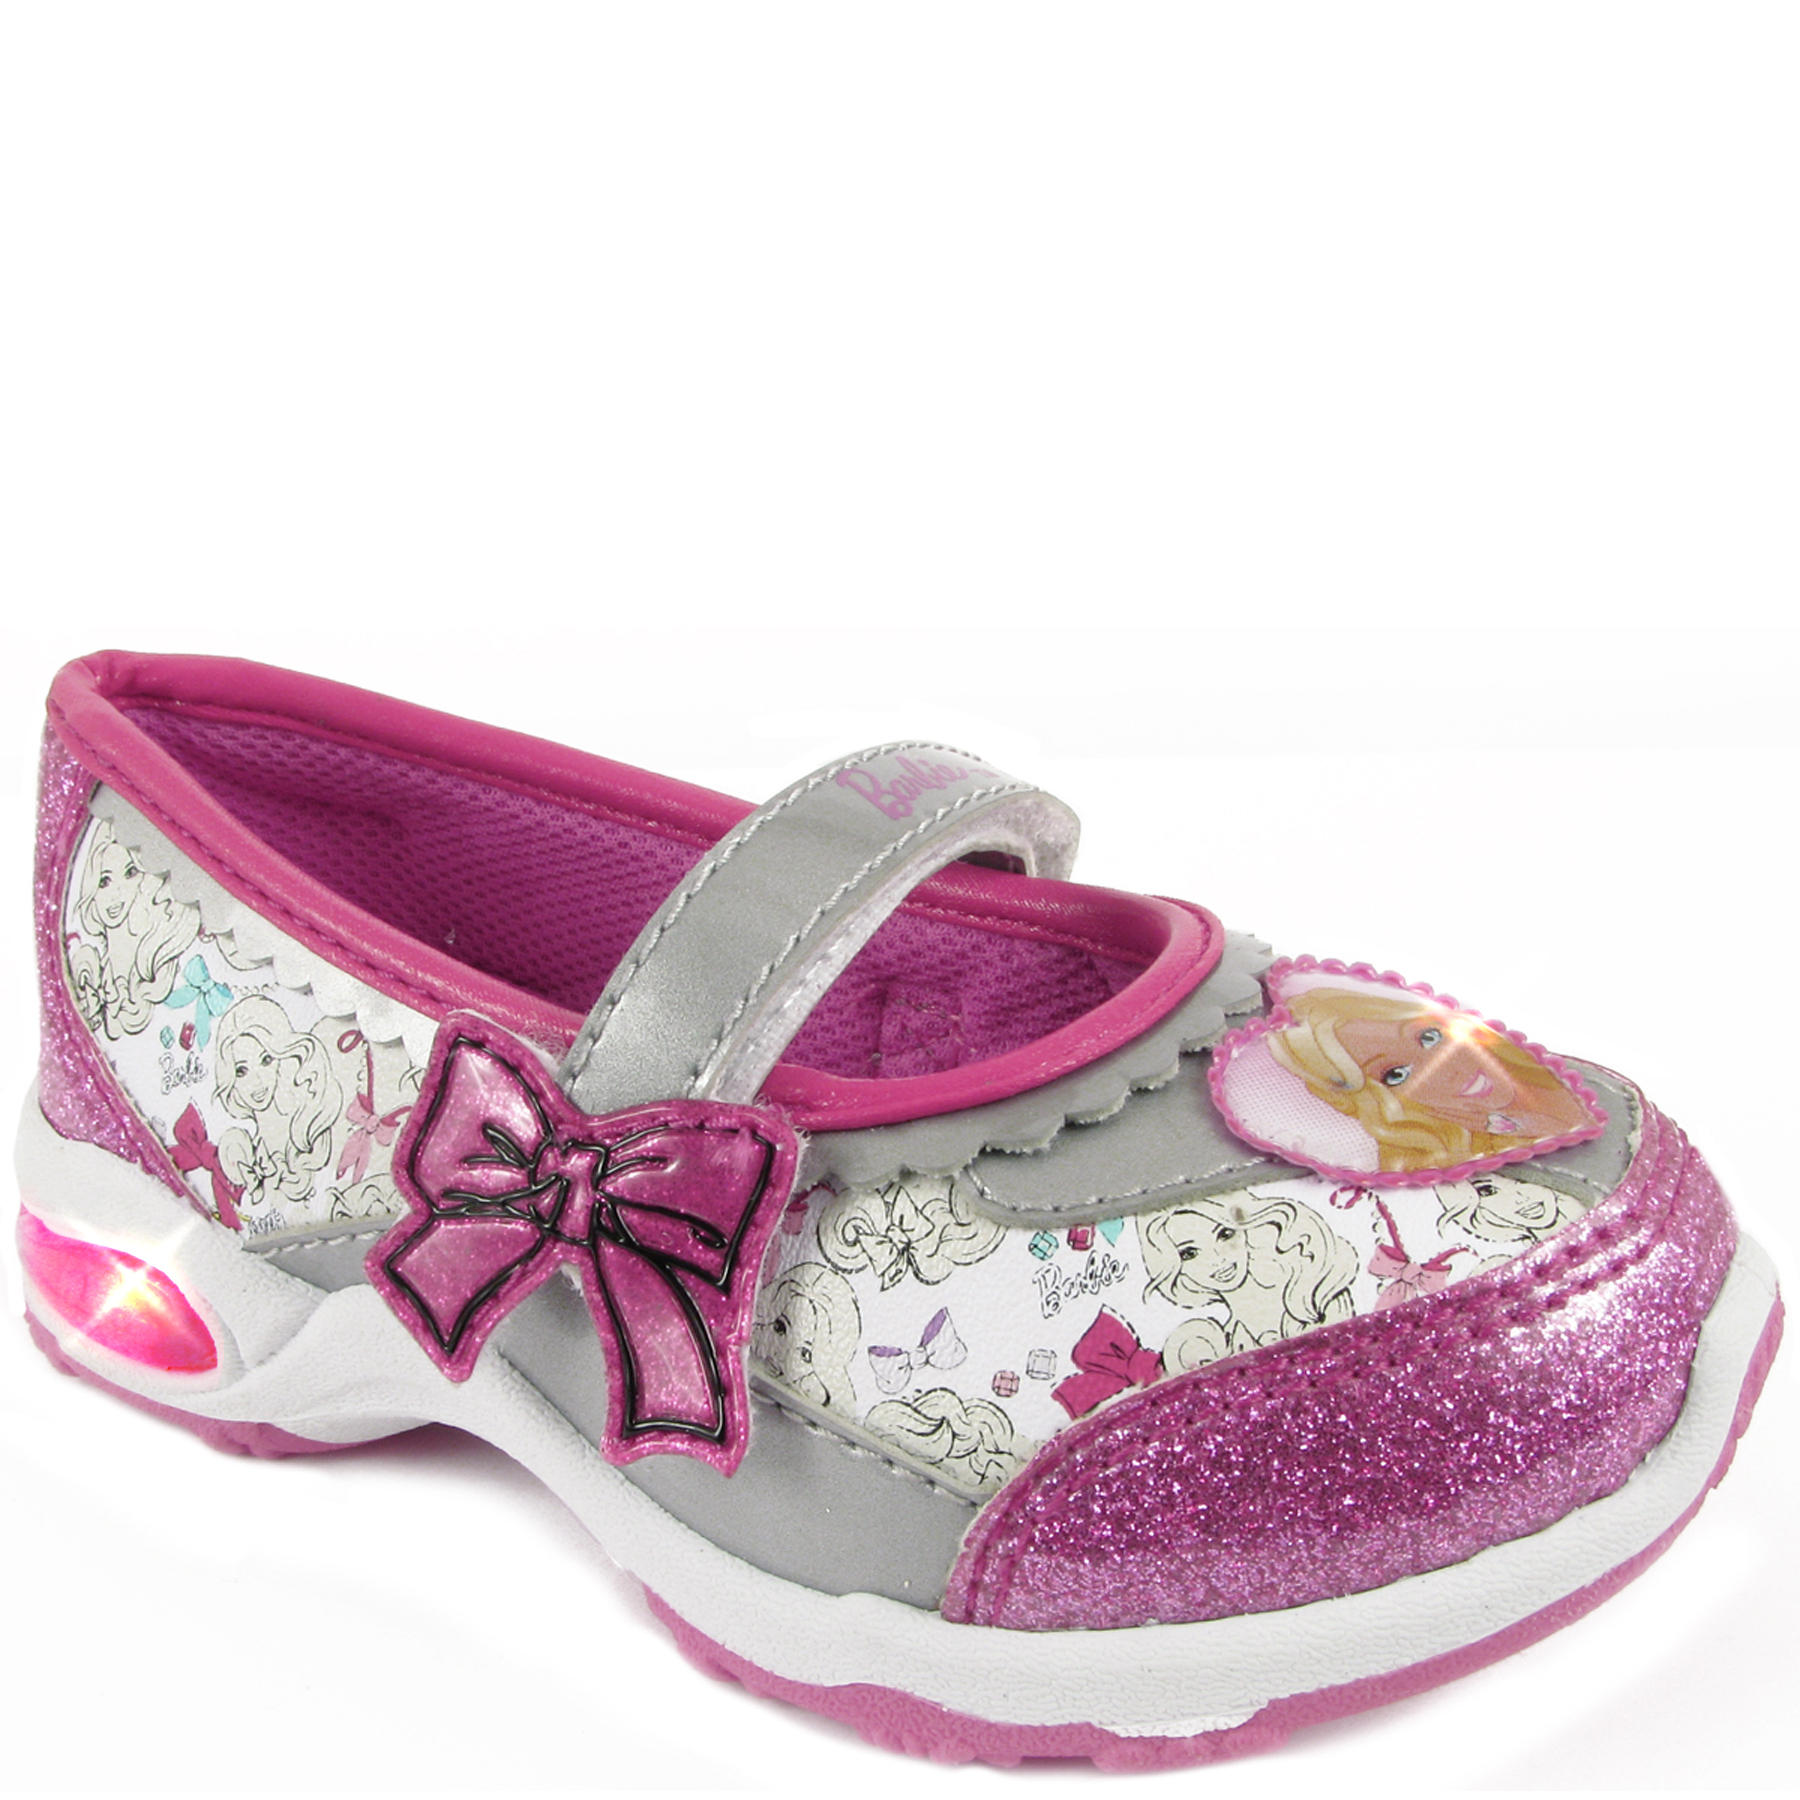 Character Toddler Girl's Barbie Athletic Shoe - White/Pink